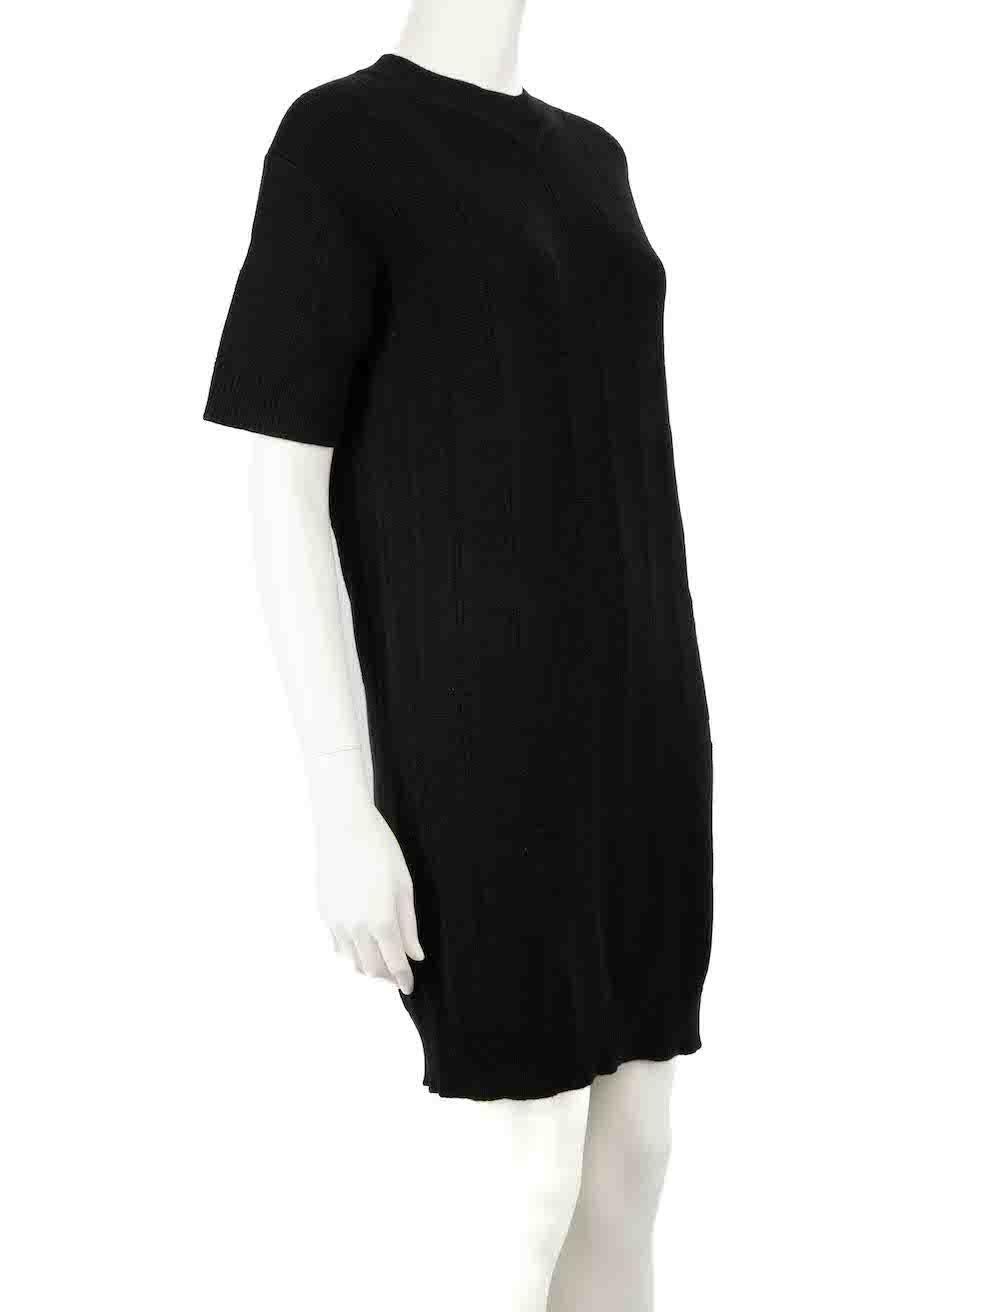 CONDITION is Very good. Minimal wear to dress is evident. Minimal wear to the knitted surface with very light pilling seen throughout on this used Hermès designer resale item.
 
Details
Black
Wool
Knit dress
Stretchy
Mini length
Round neckline
Short